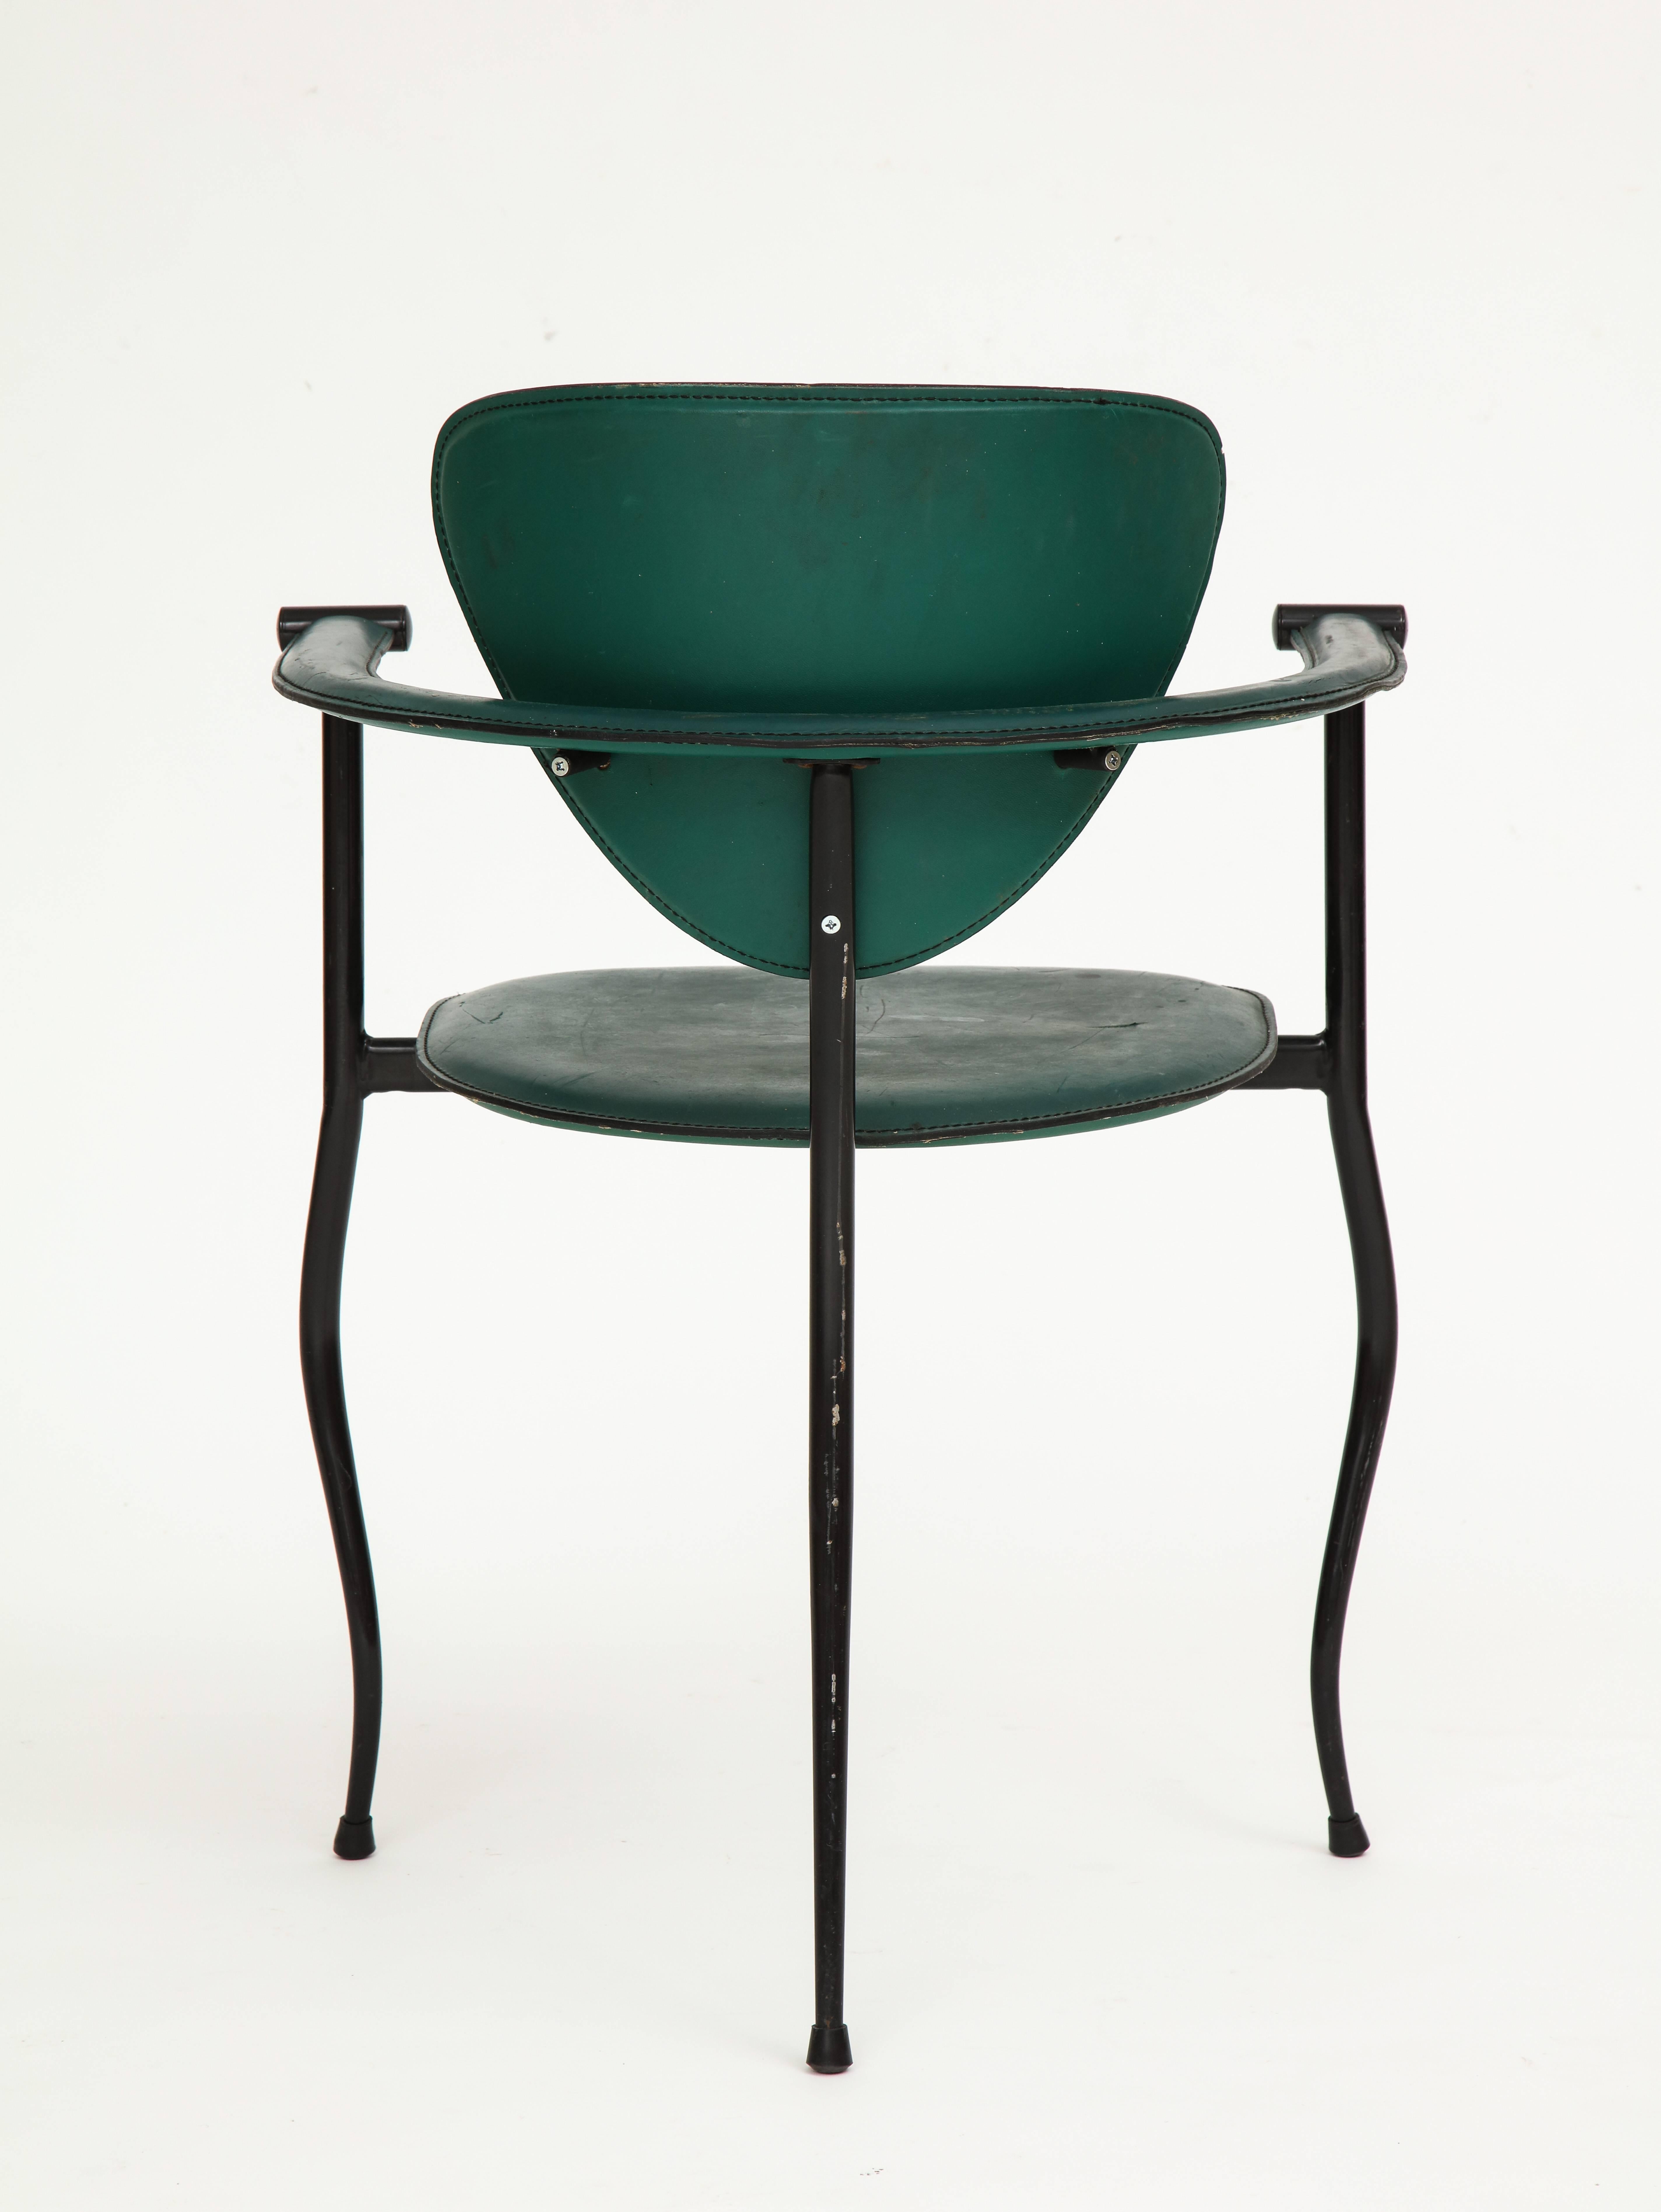 Late 20th Century Postmodern Sculptural Green Leather and Iron Side Chairs, 1980s-1990s